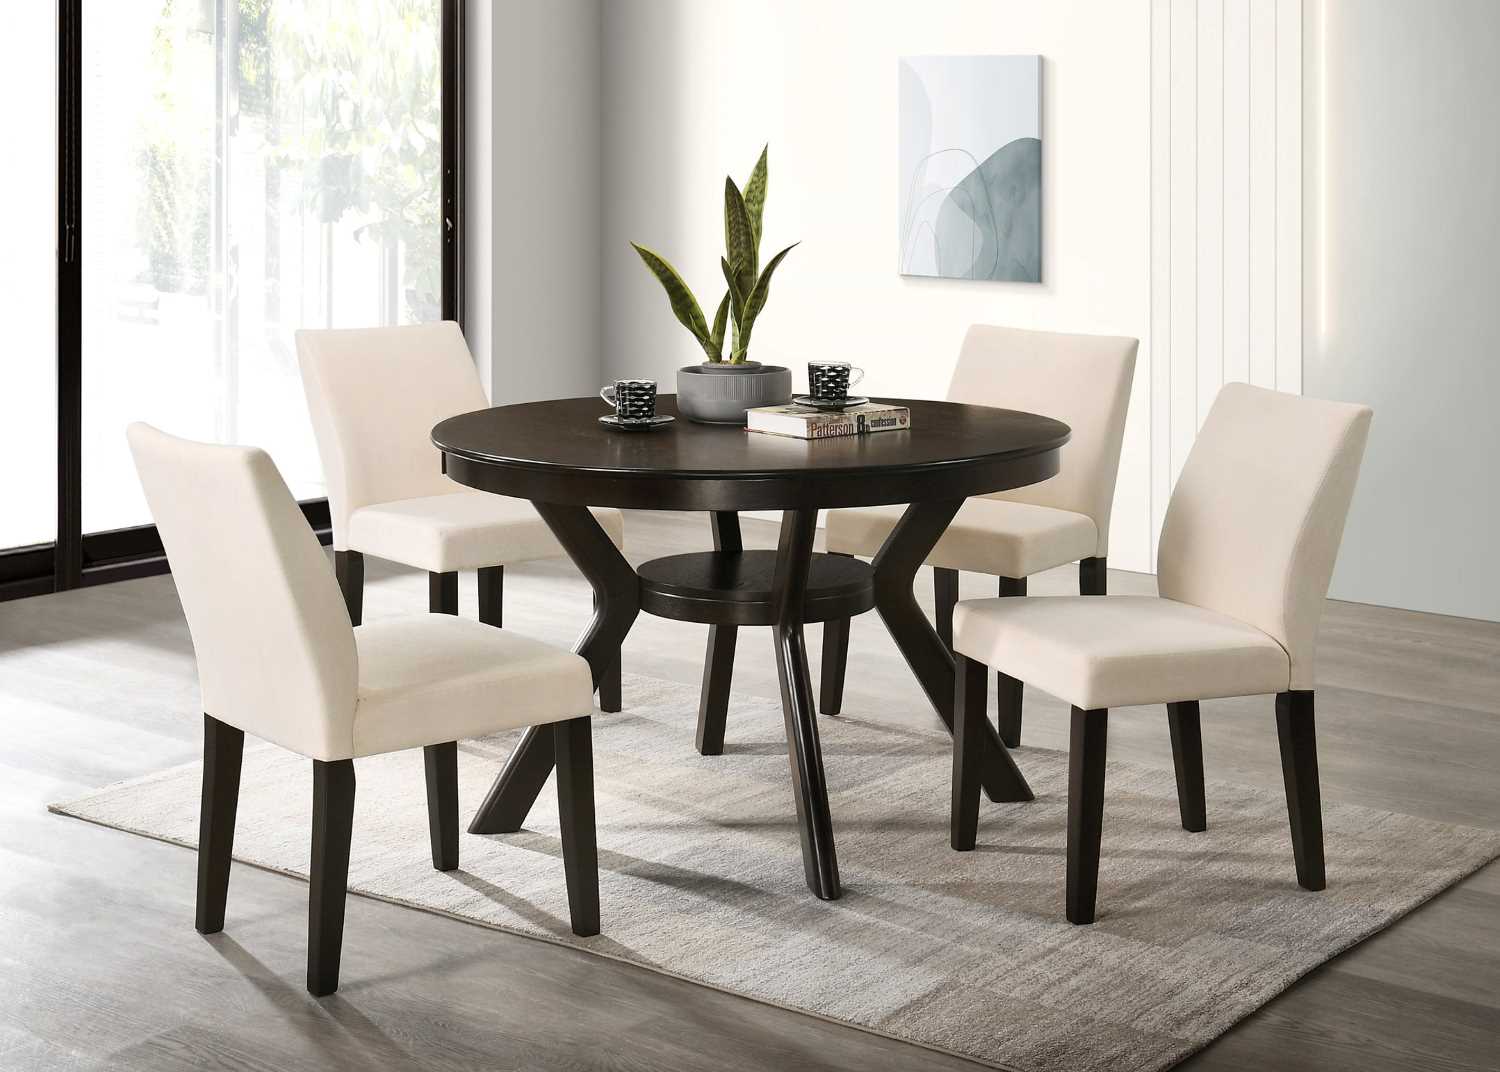 Dining Collection Espresso T-1085 / C-1085